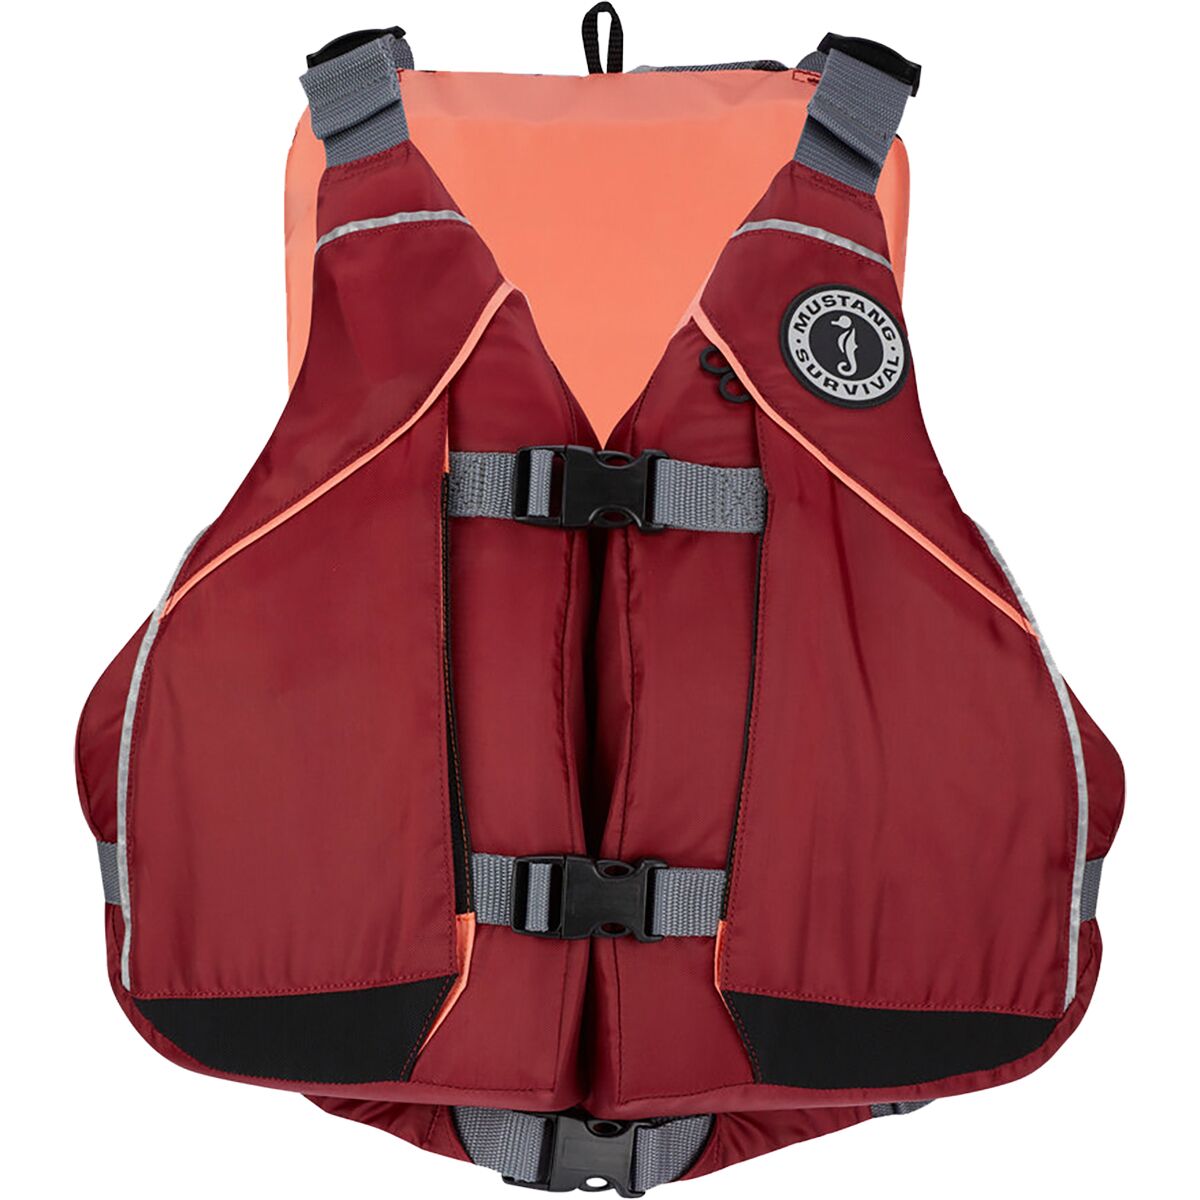 Mustang Survival Moxie Personal Flotation Device - Women's